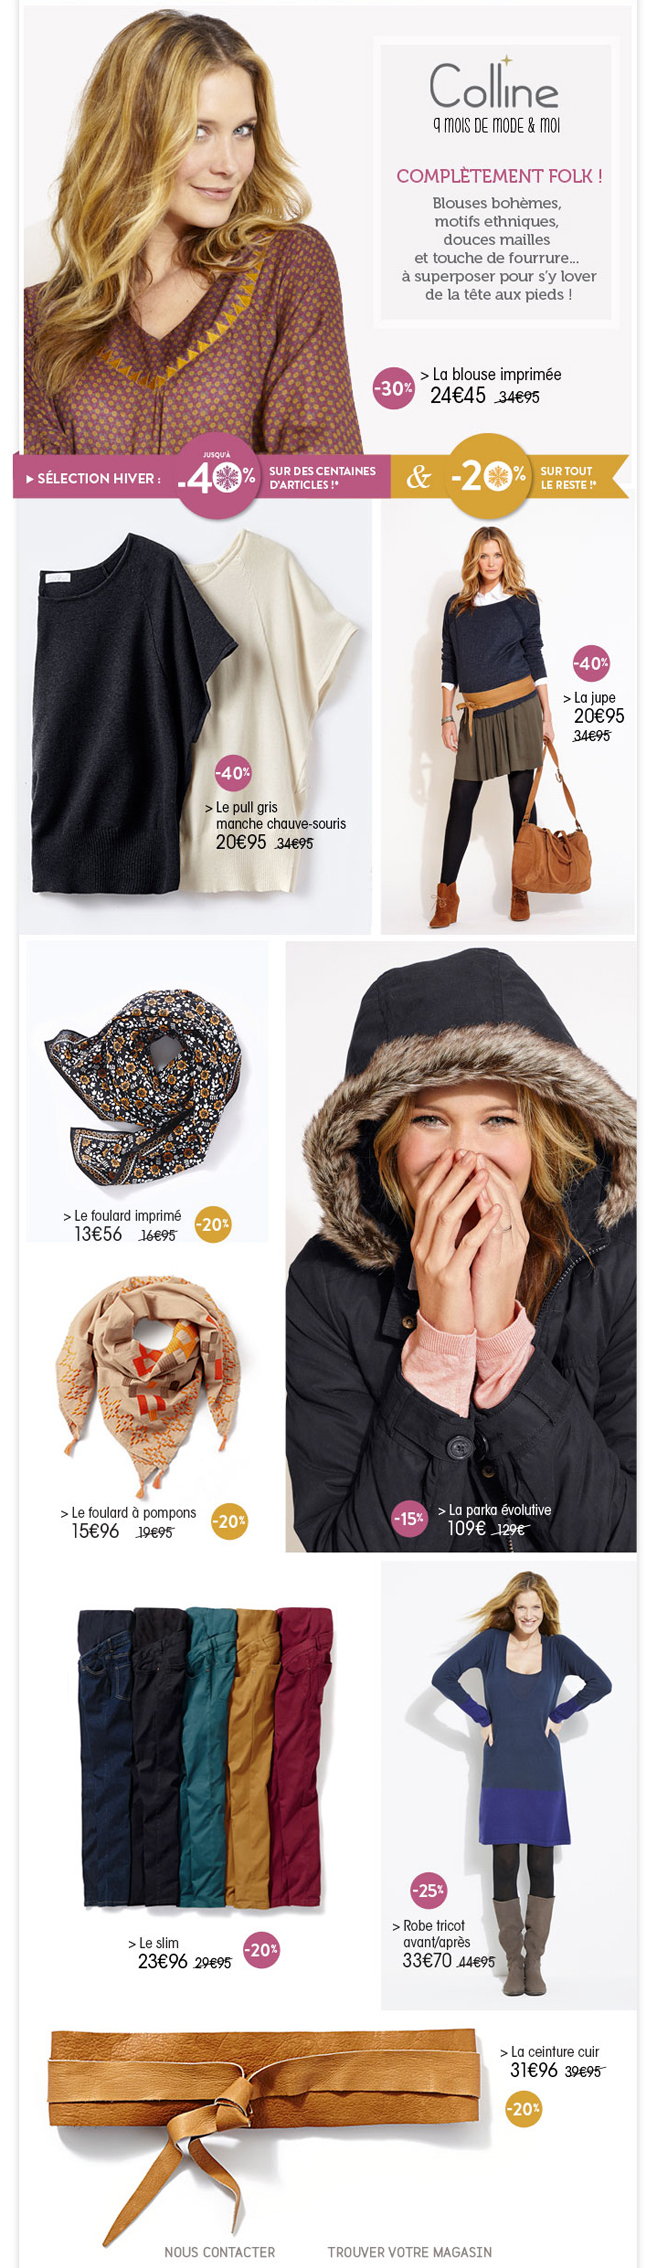 Email Campagne Hiver 2014-15